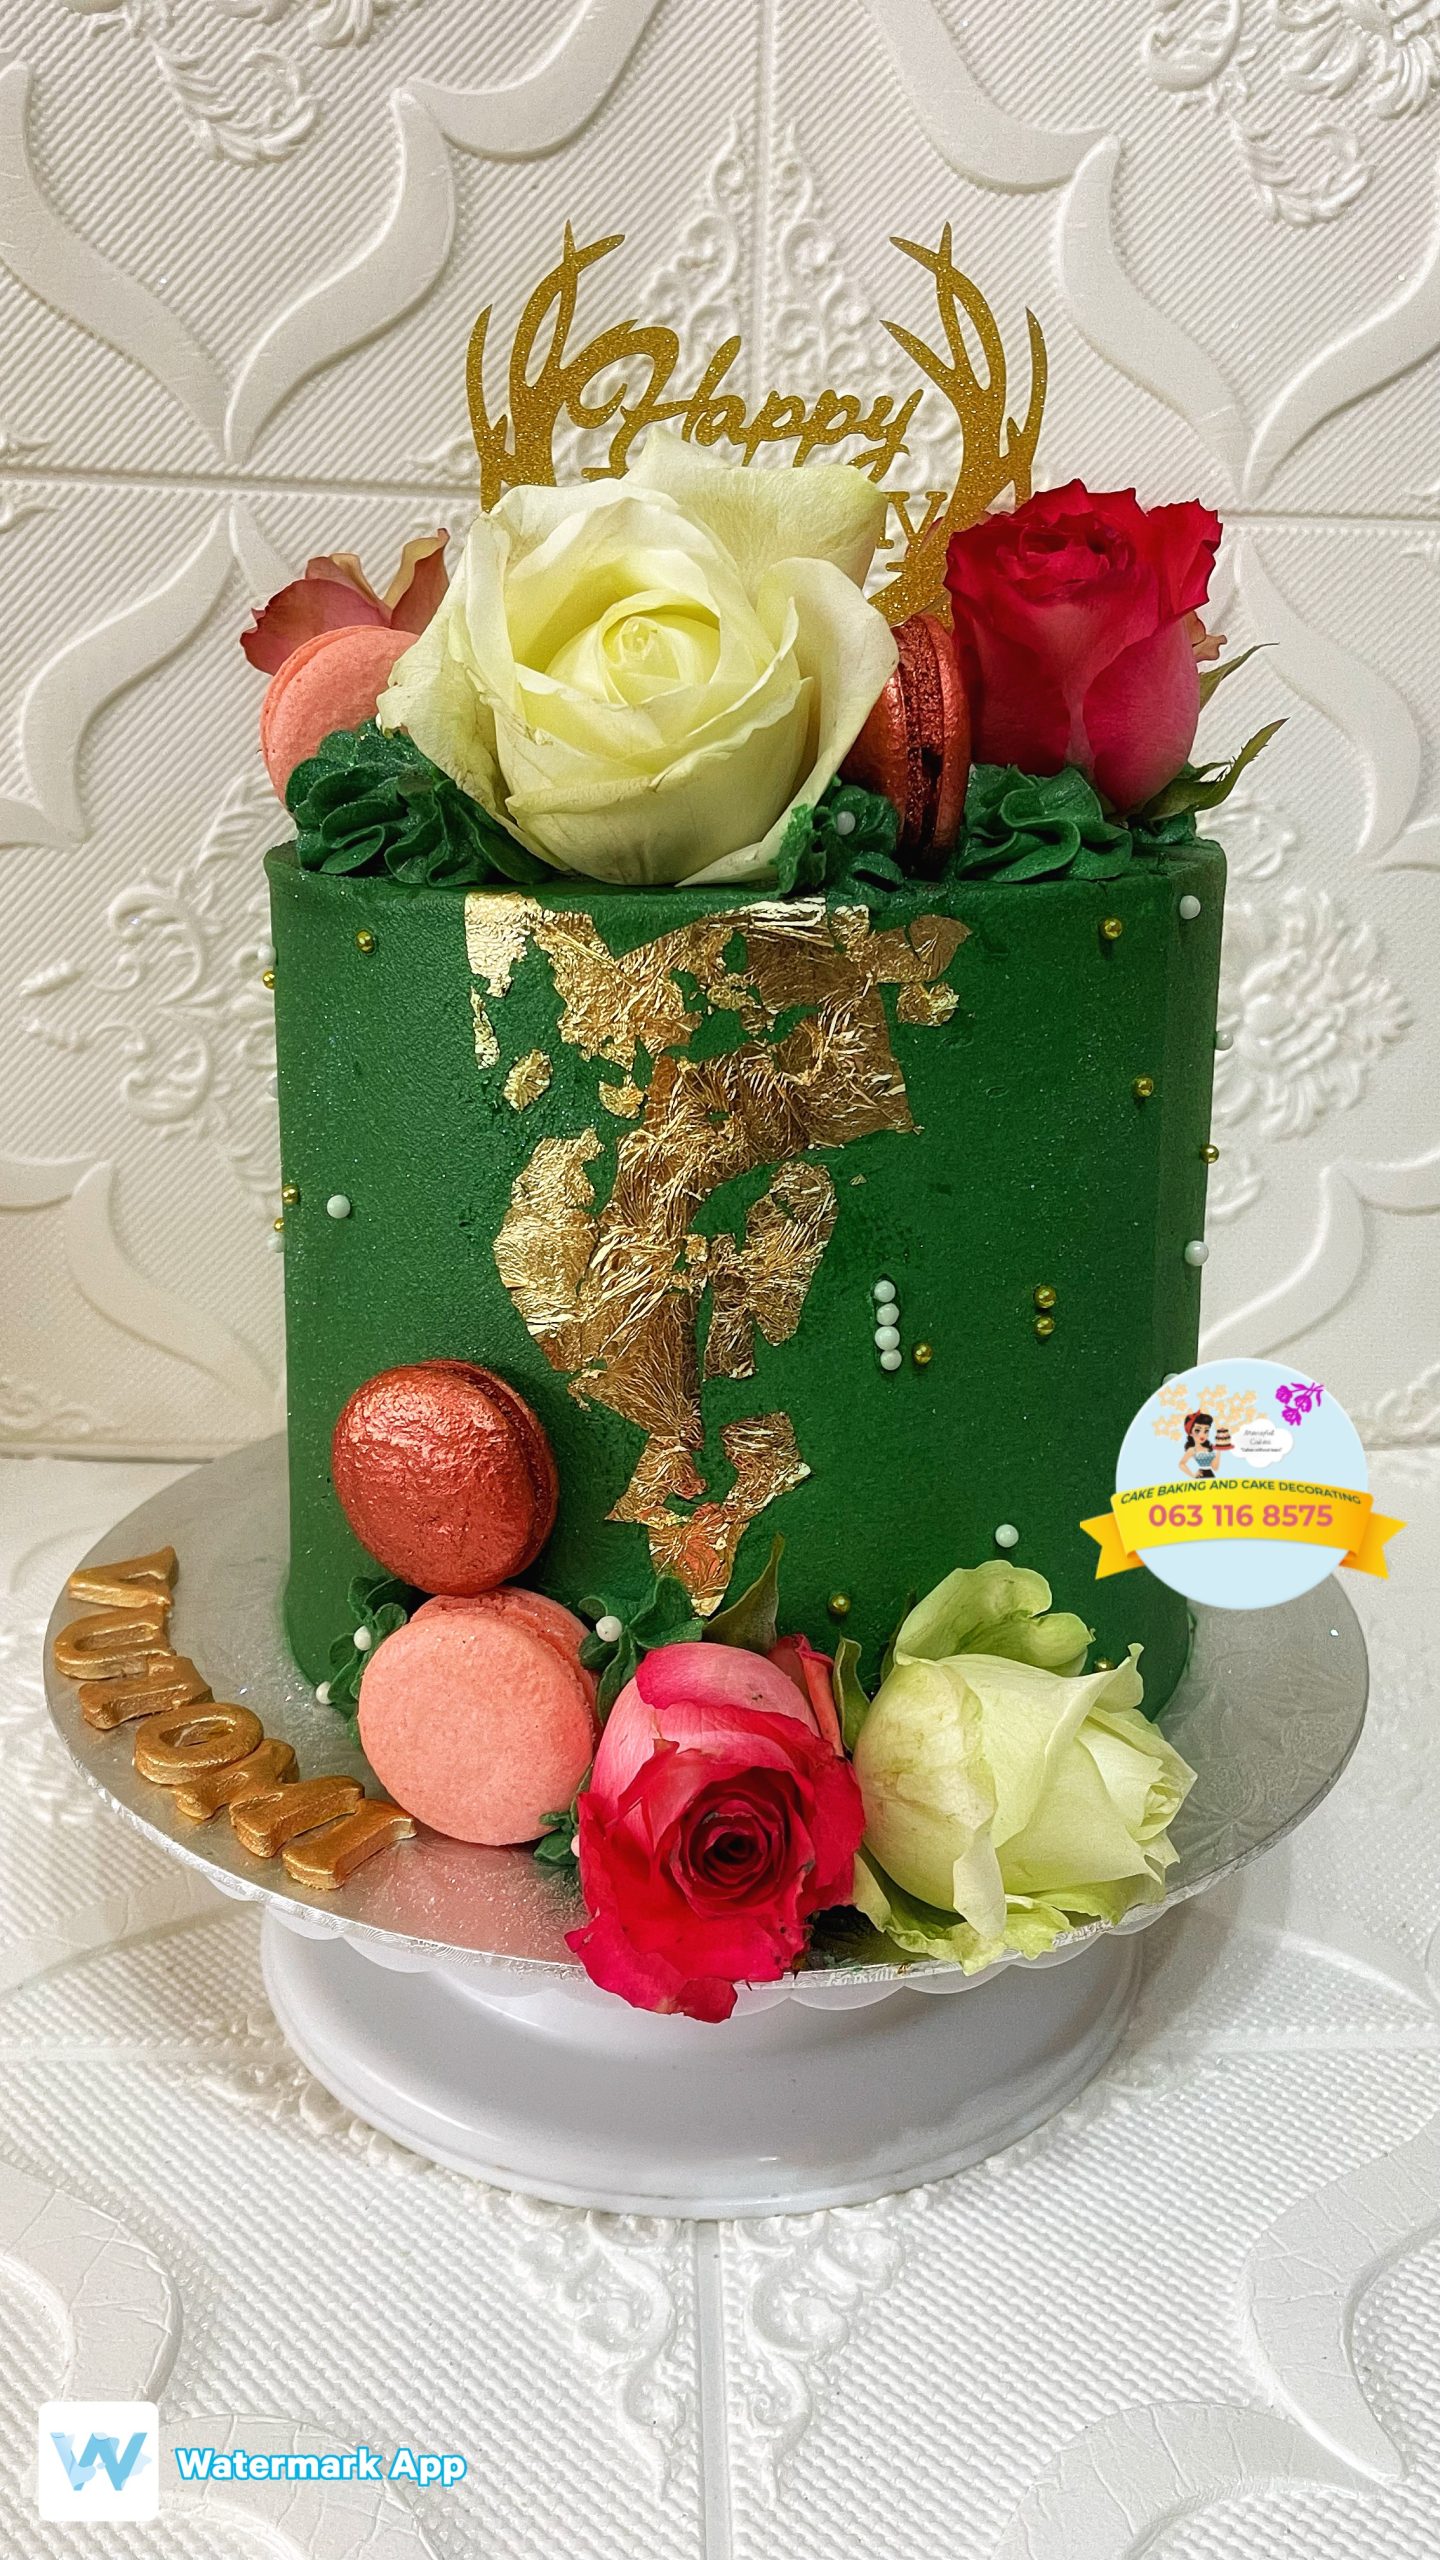 Enchanted Forest, Sweet 17th - Decorated Cake by Guilt - CakesDecor